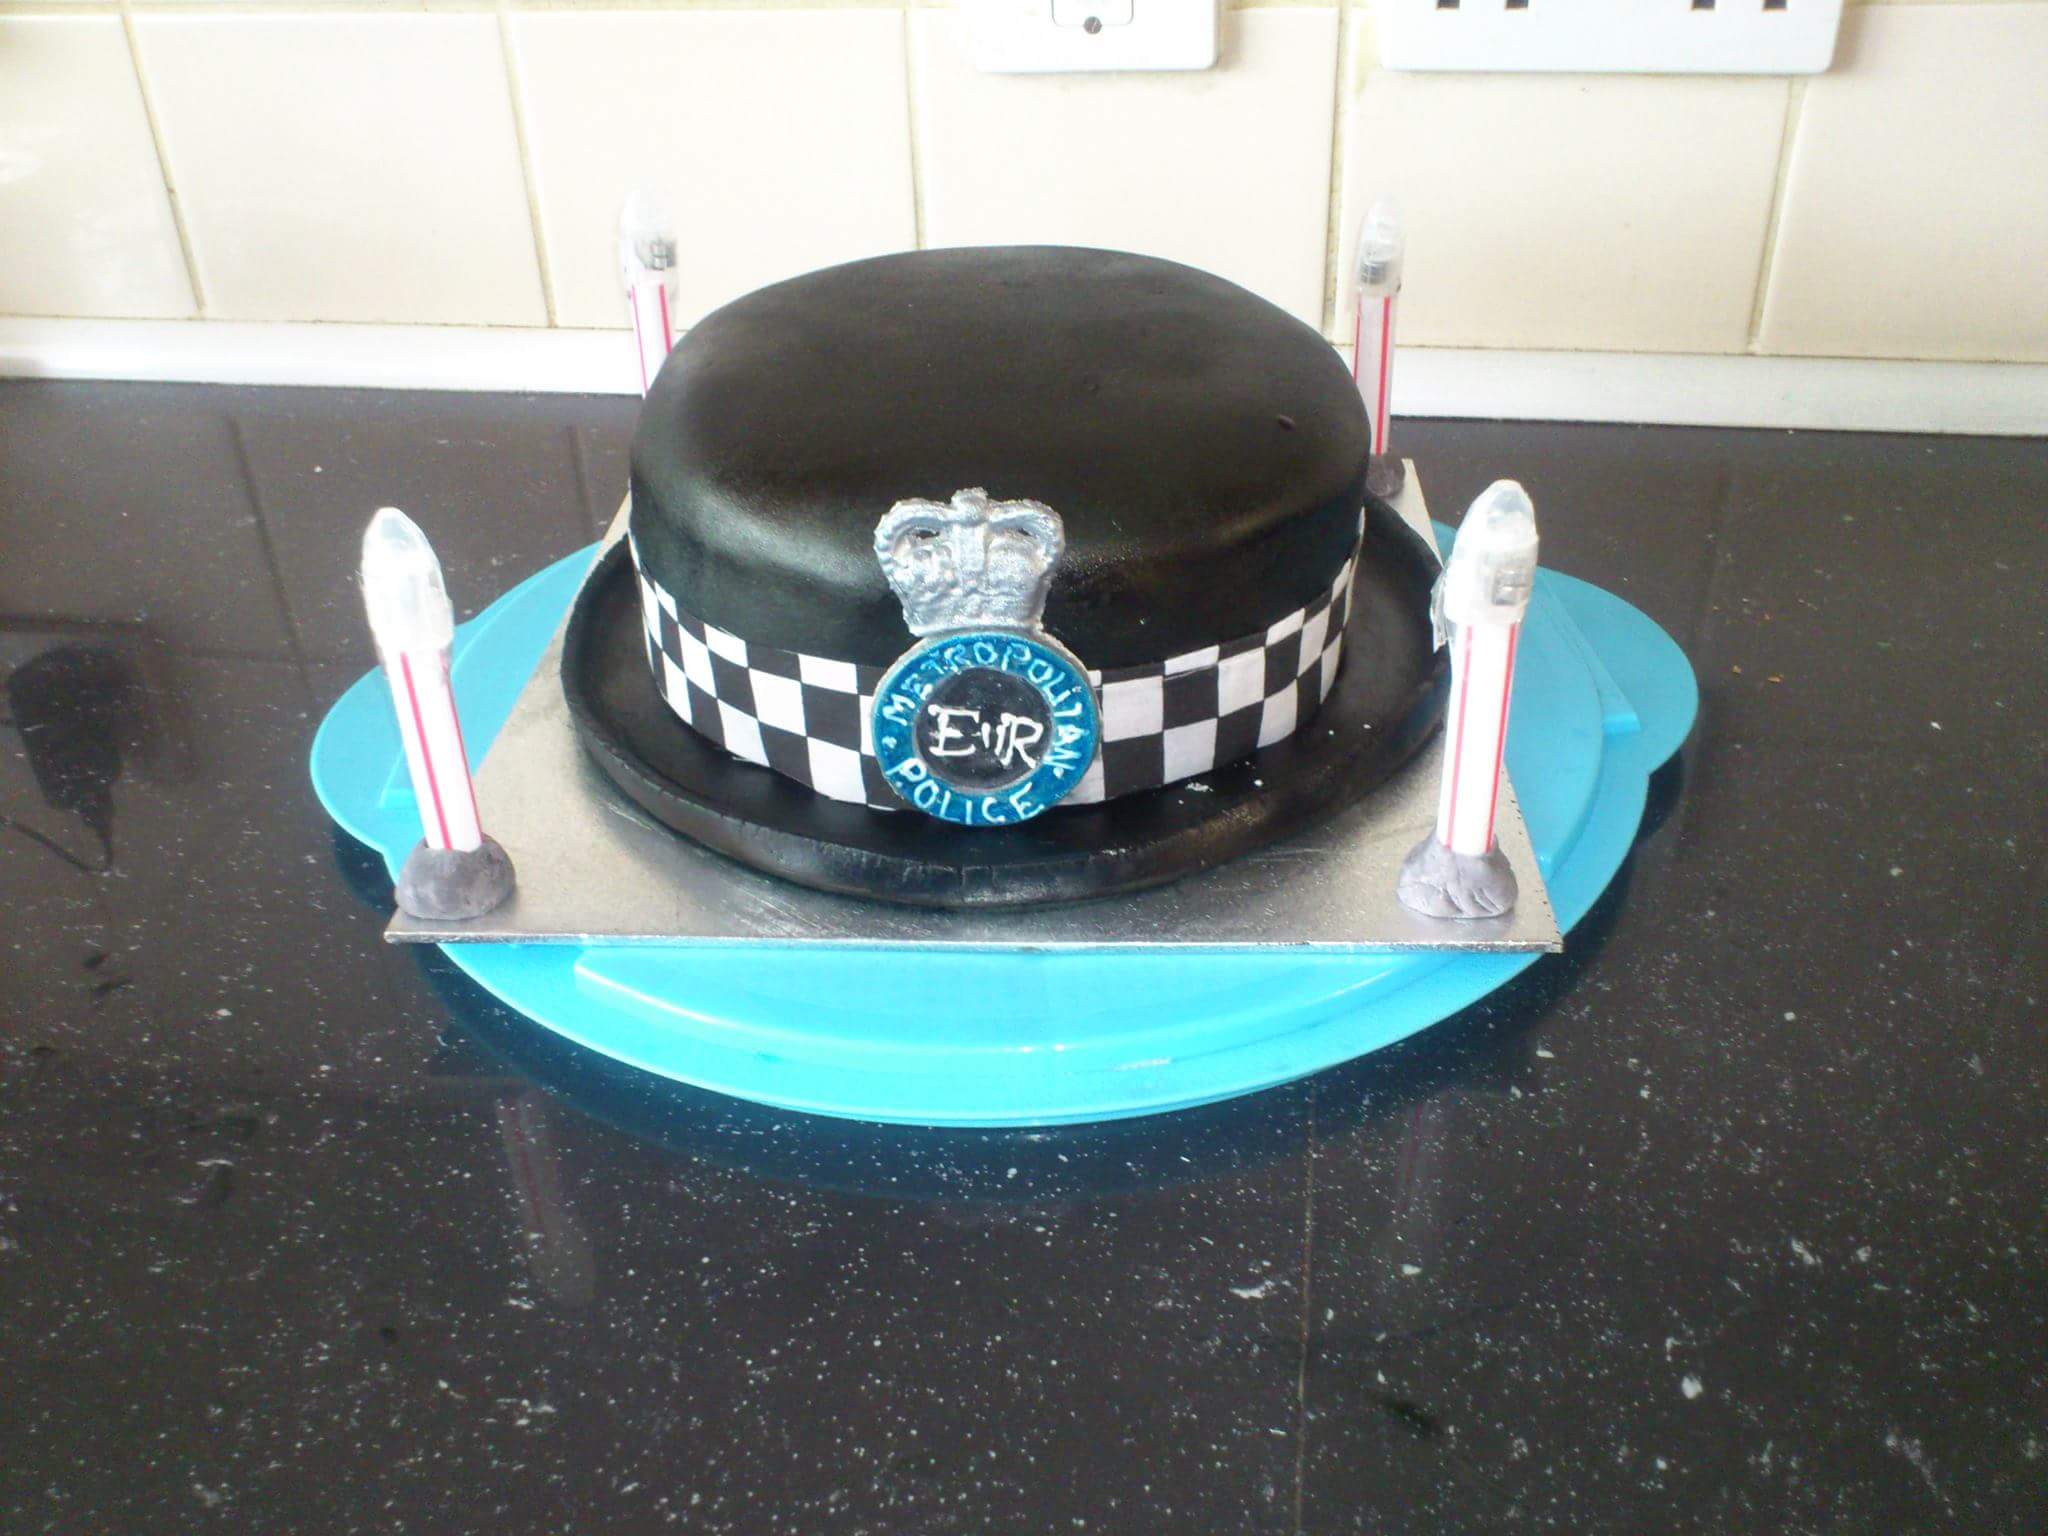 'The Bill' Police Hat Cake